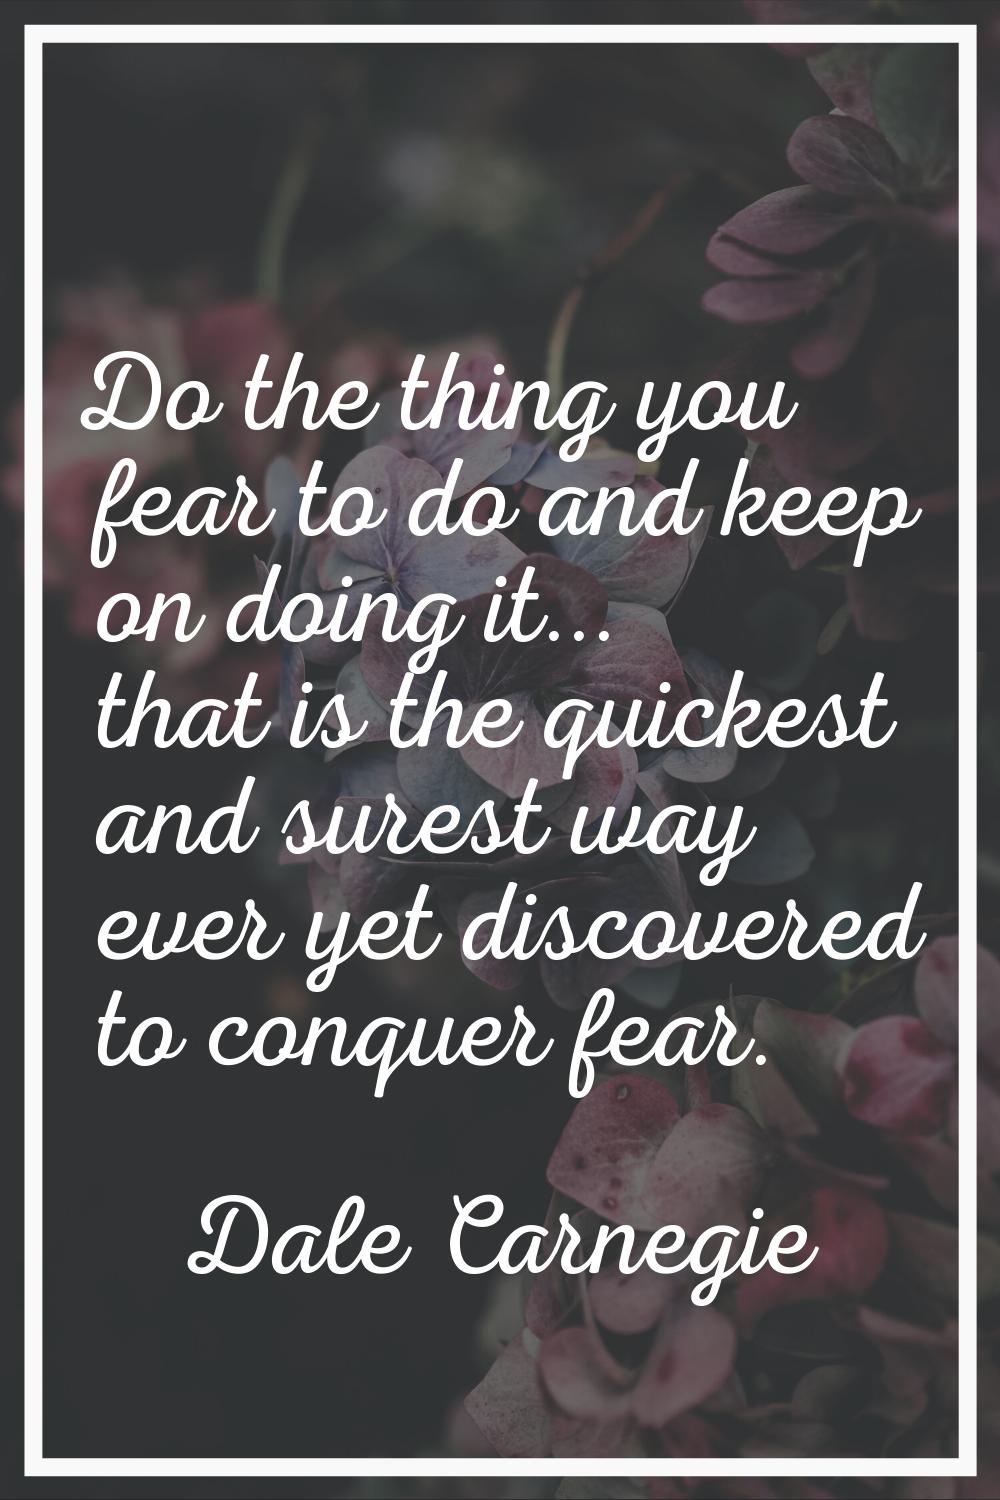 Do the thing you fear to do and keep on doing it... that is the quickest and surest way ever yet di